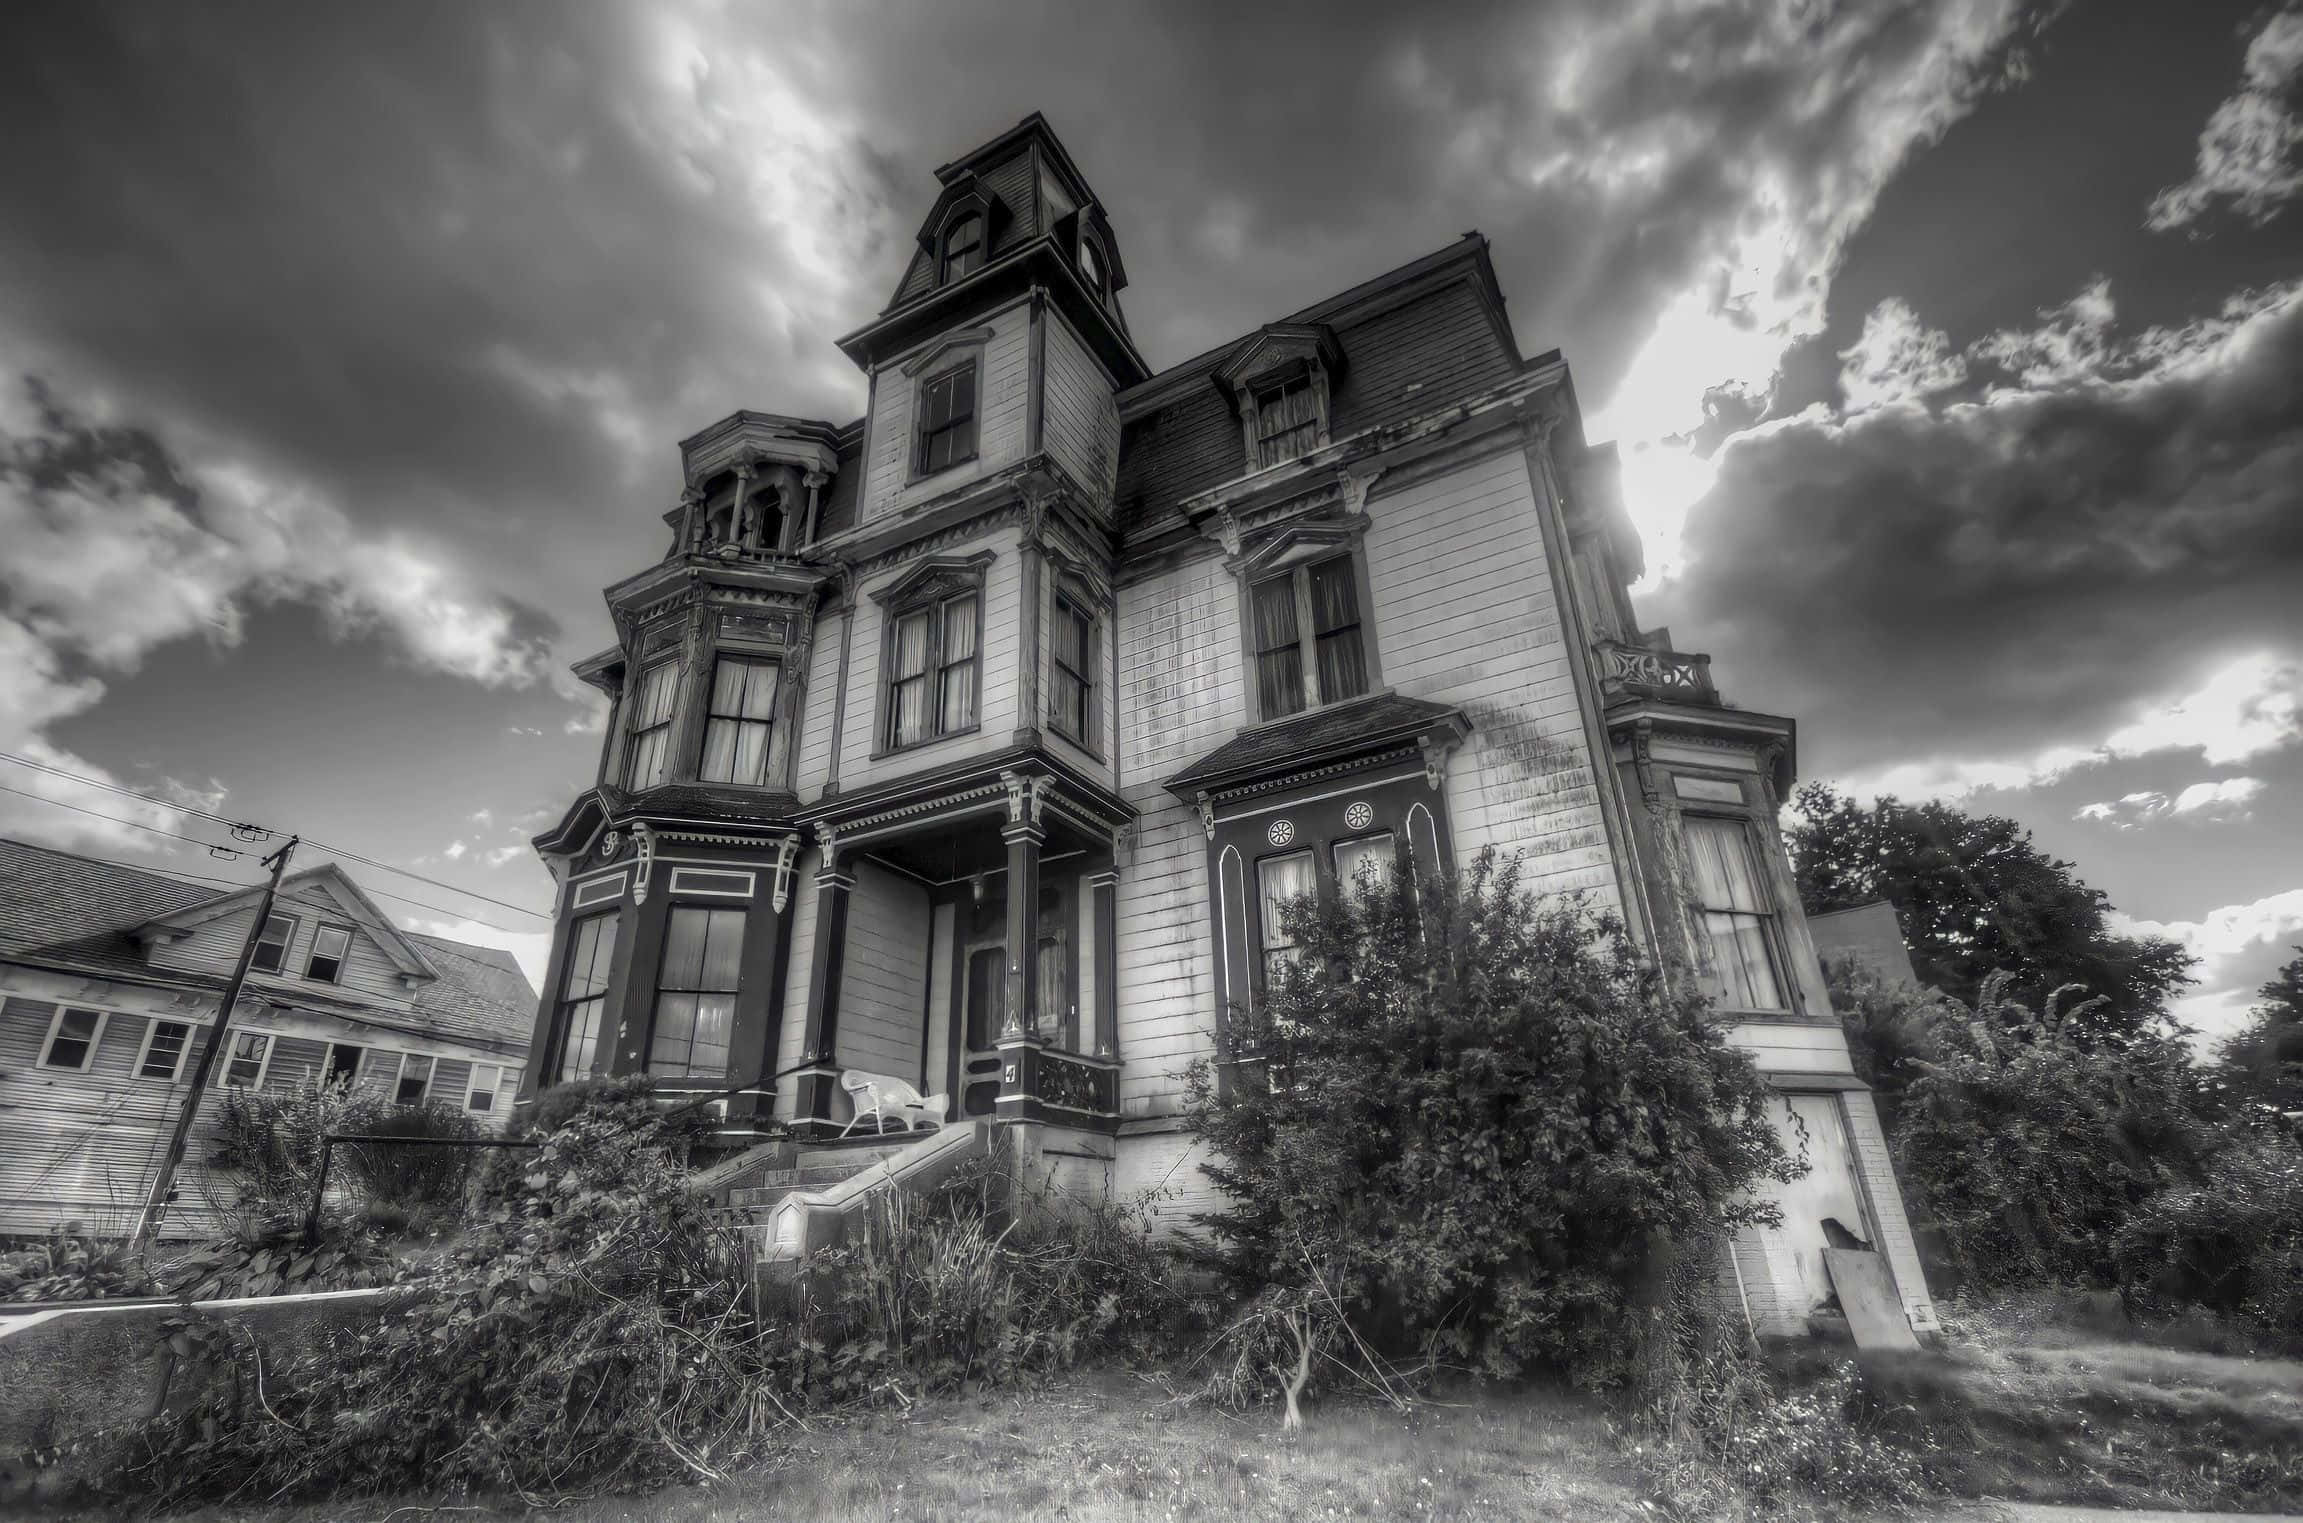 A Black And White Photo Of An Old Victorian House